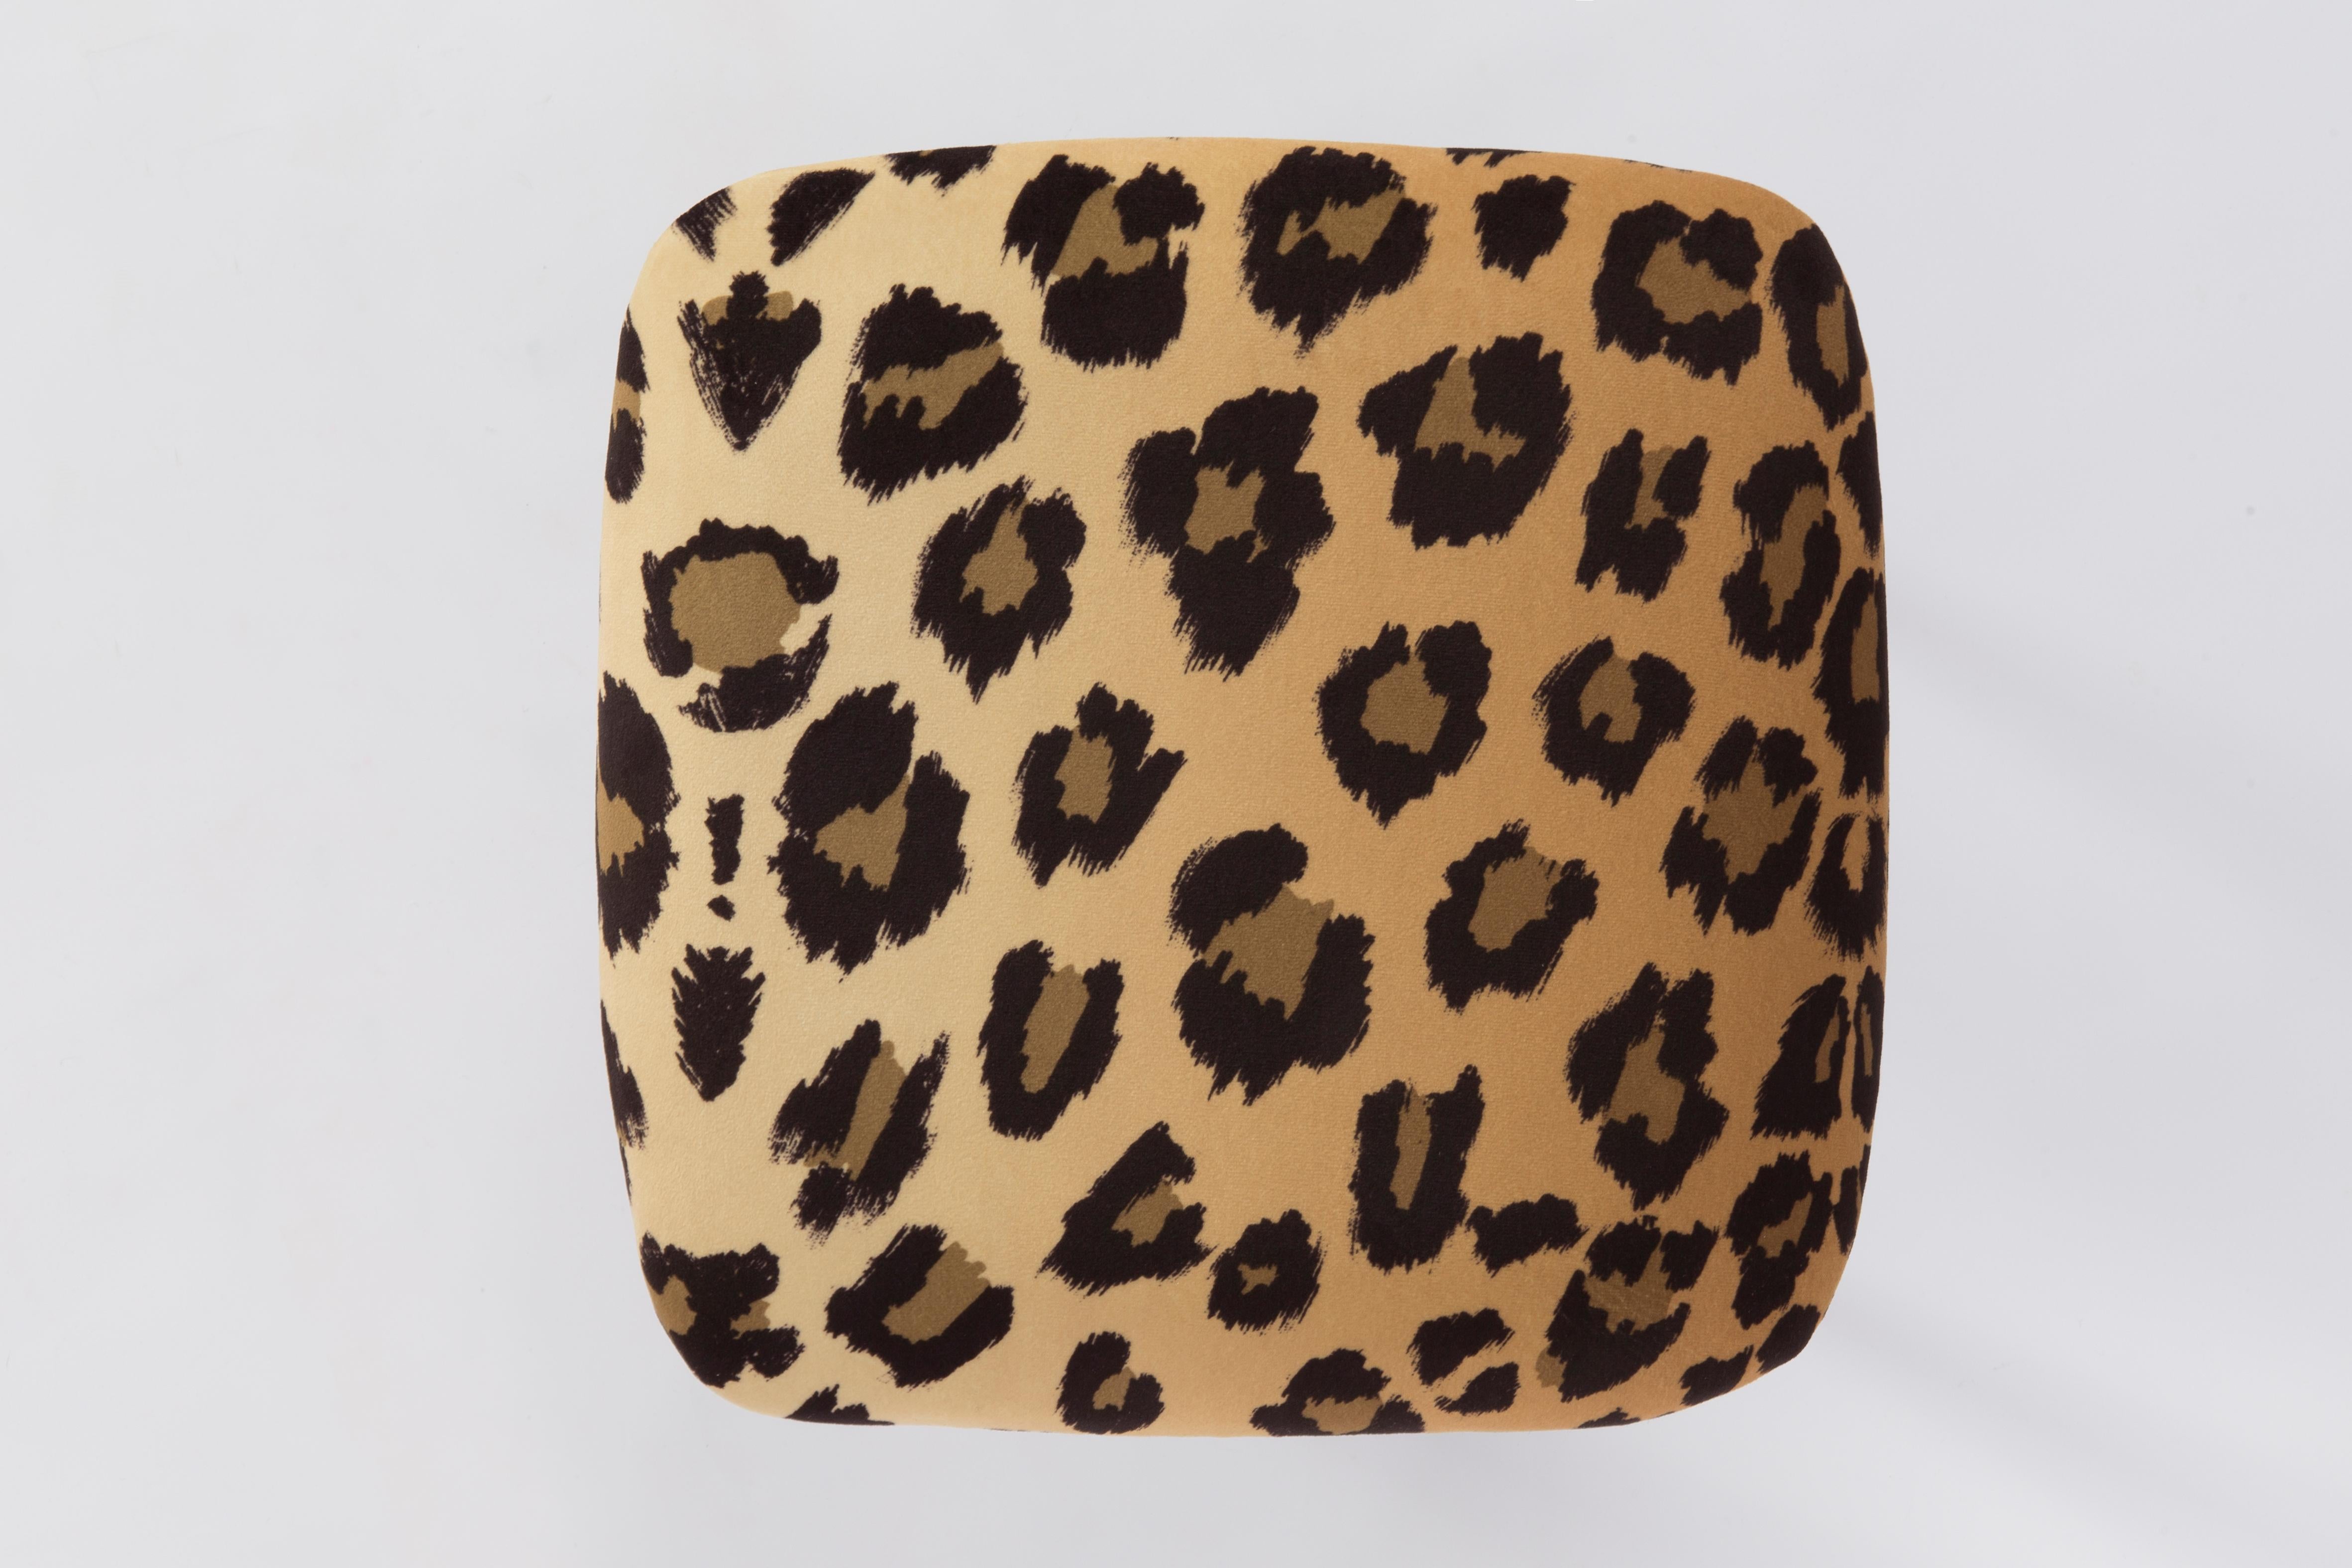 Stools from the turn of the 1960s and 1970s. Beautiful soft velvet leopard print upholstery. The stools consists of an upholstered part, a seat and wooden legs narrowing downwards, characteristic of the 1960s style. If you want to order this stools